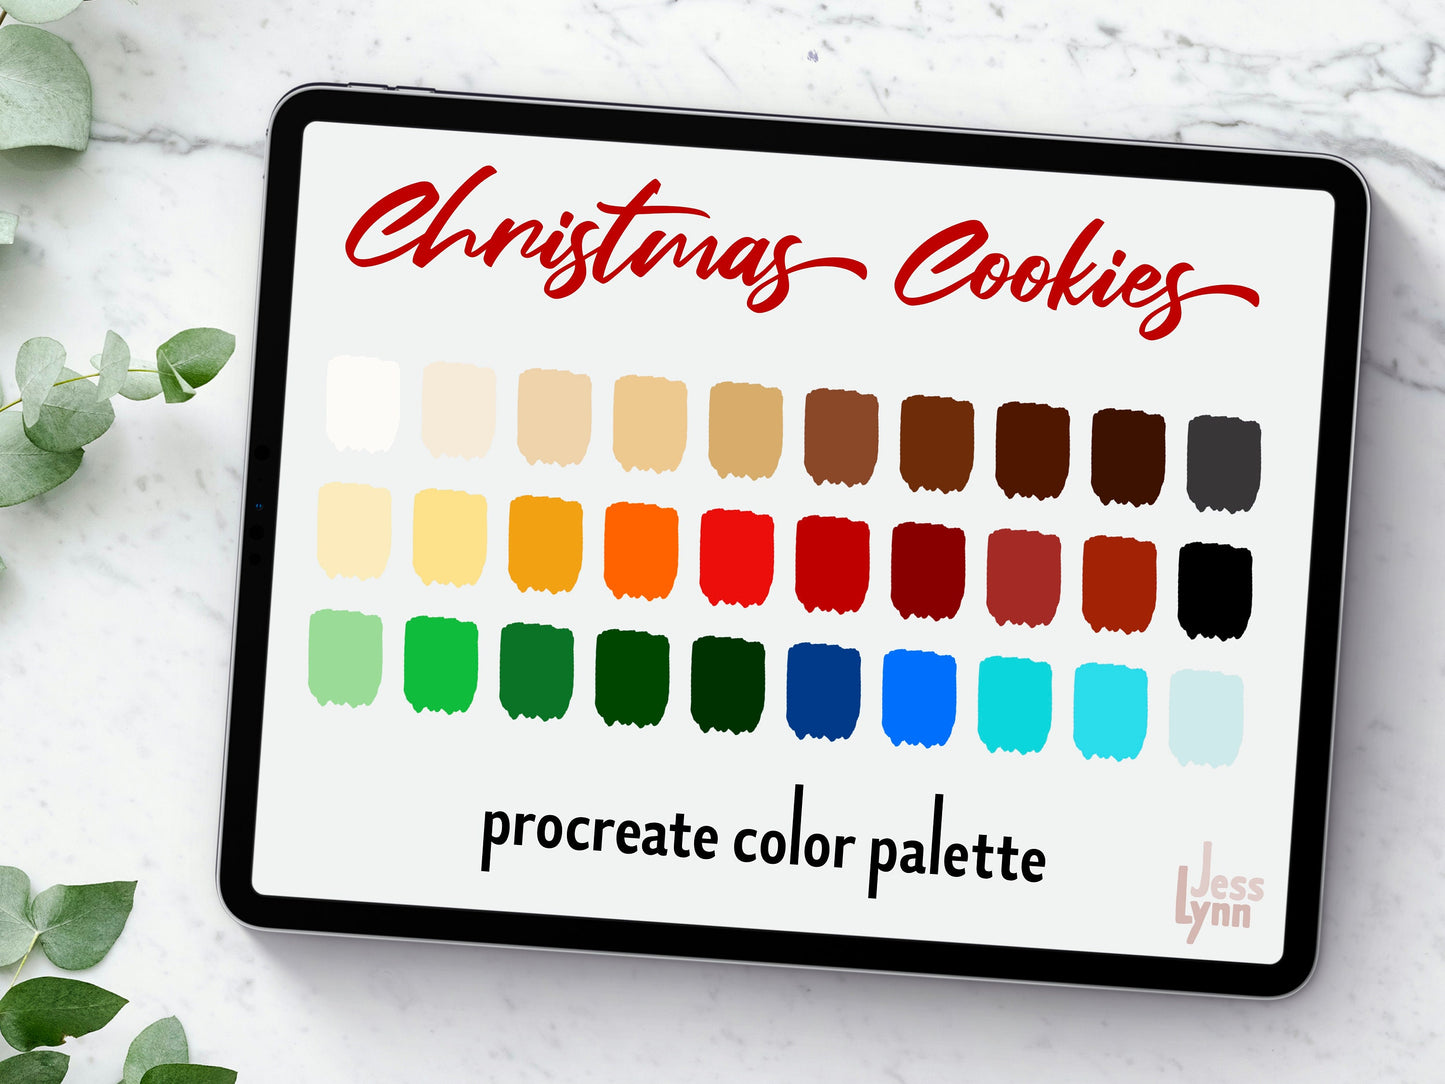 Christmas Cookie Procreate Stamps